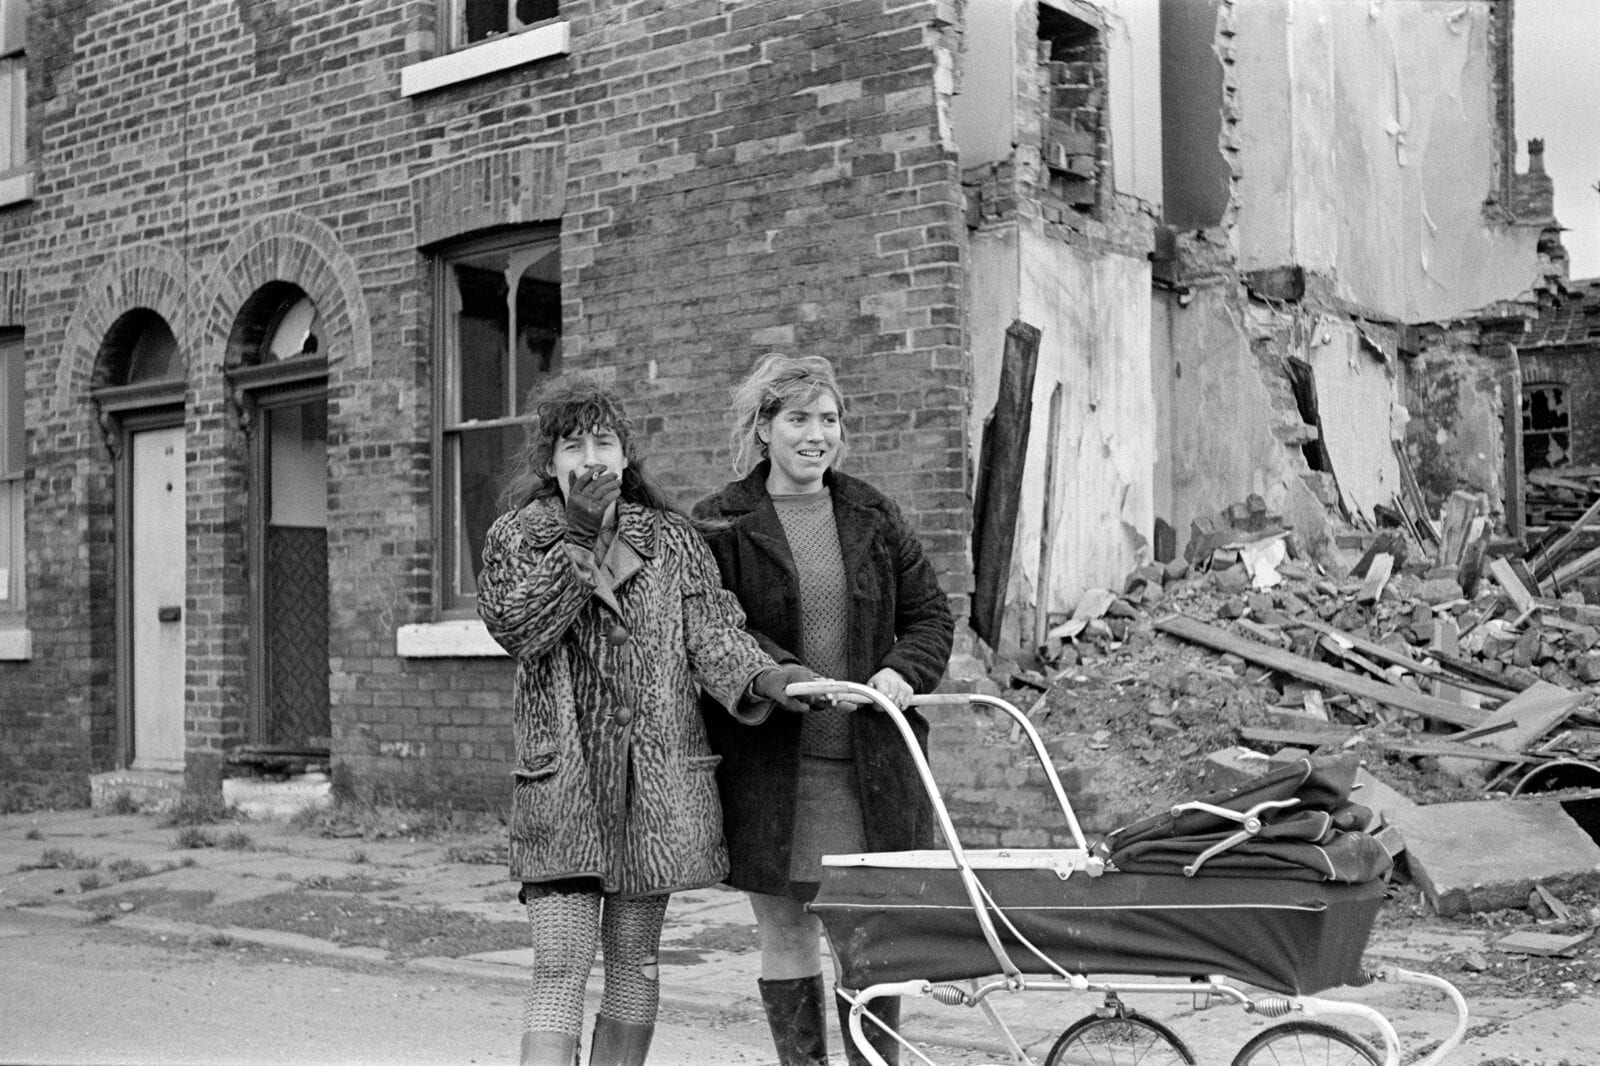 A snapshot in time: Photographer shares images captured in 1970s Manchester, The Manc